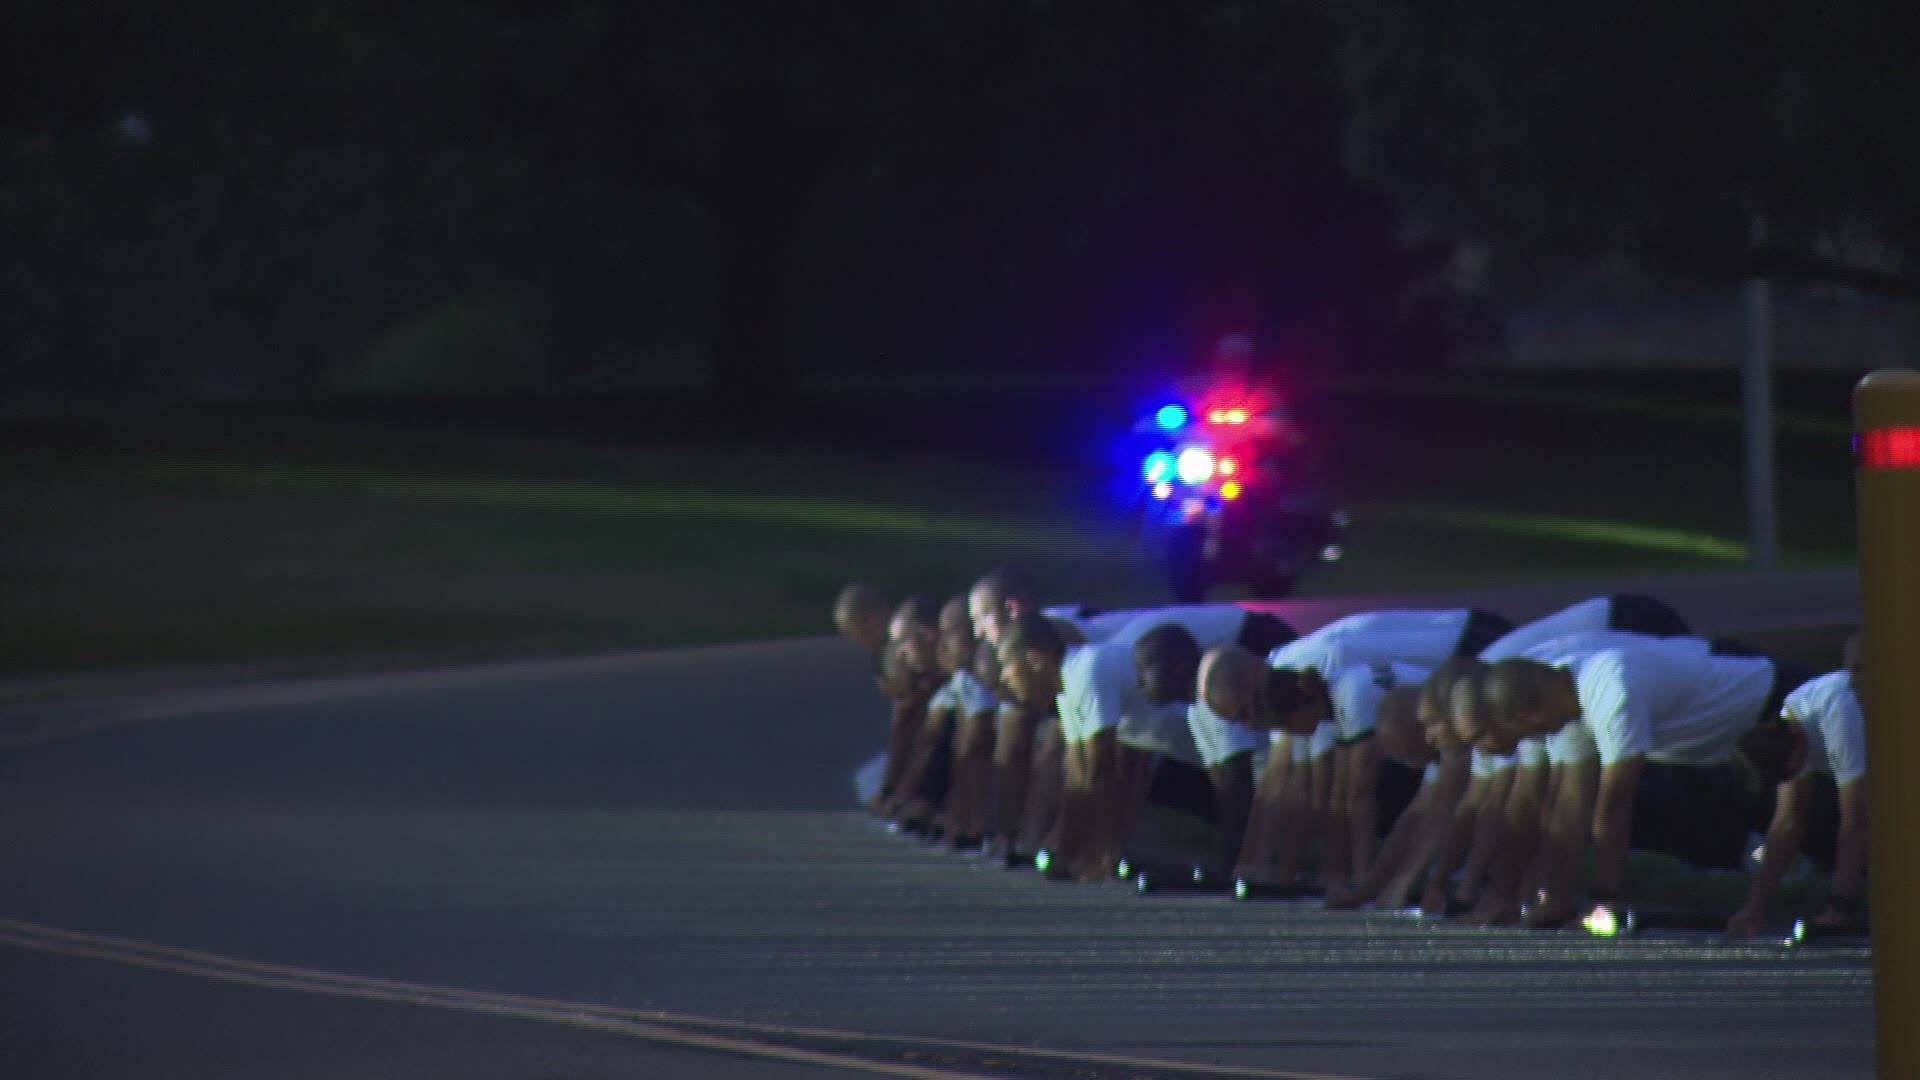 Seventy-nine cadets set out on the run, which culminated more than six months of training to become CHP officers.